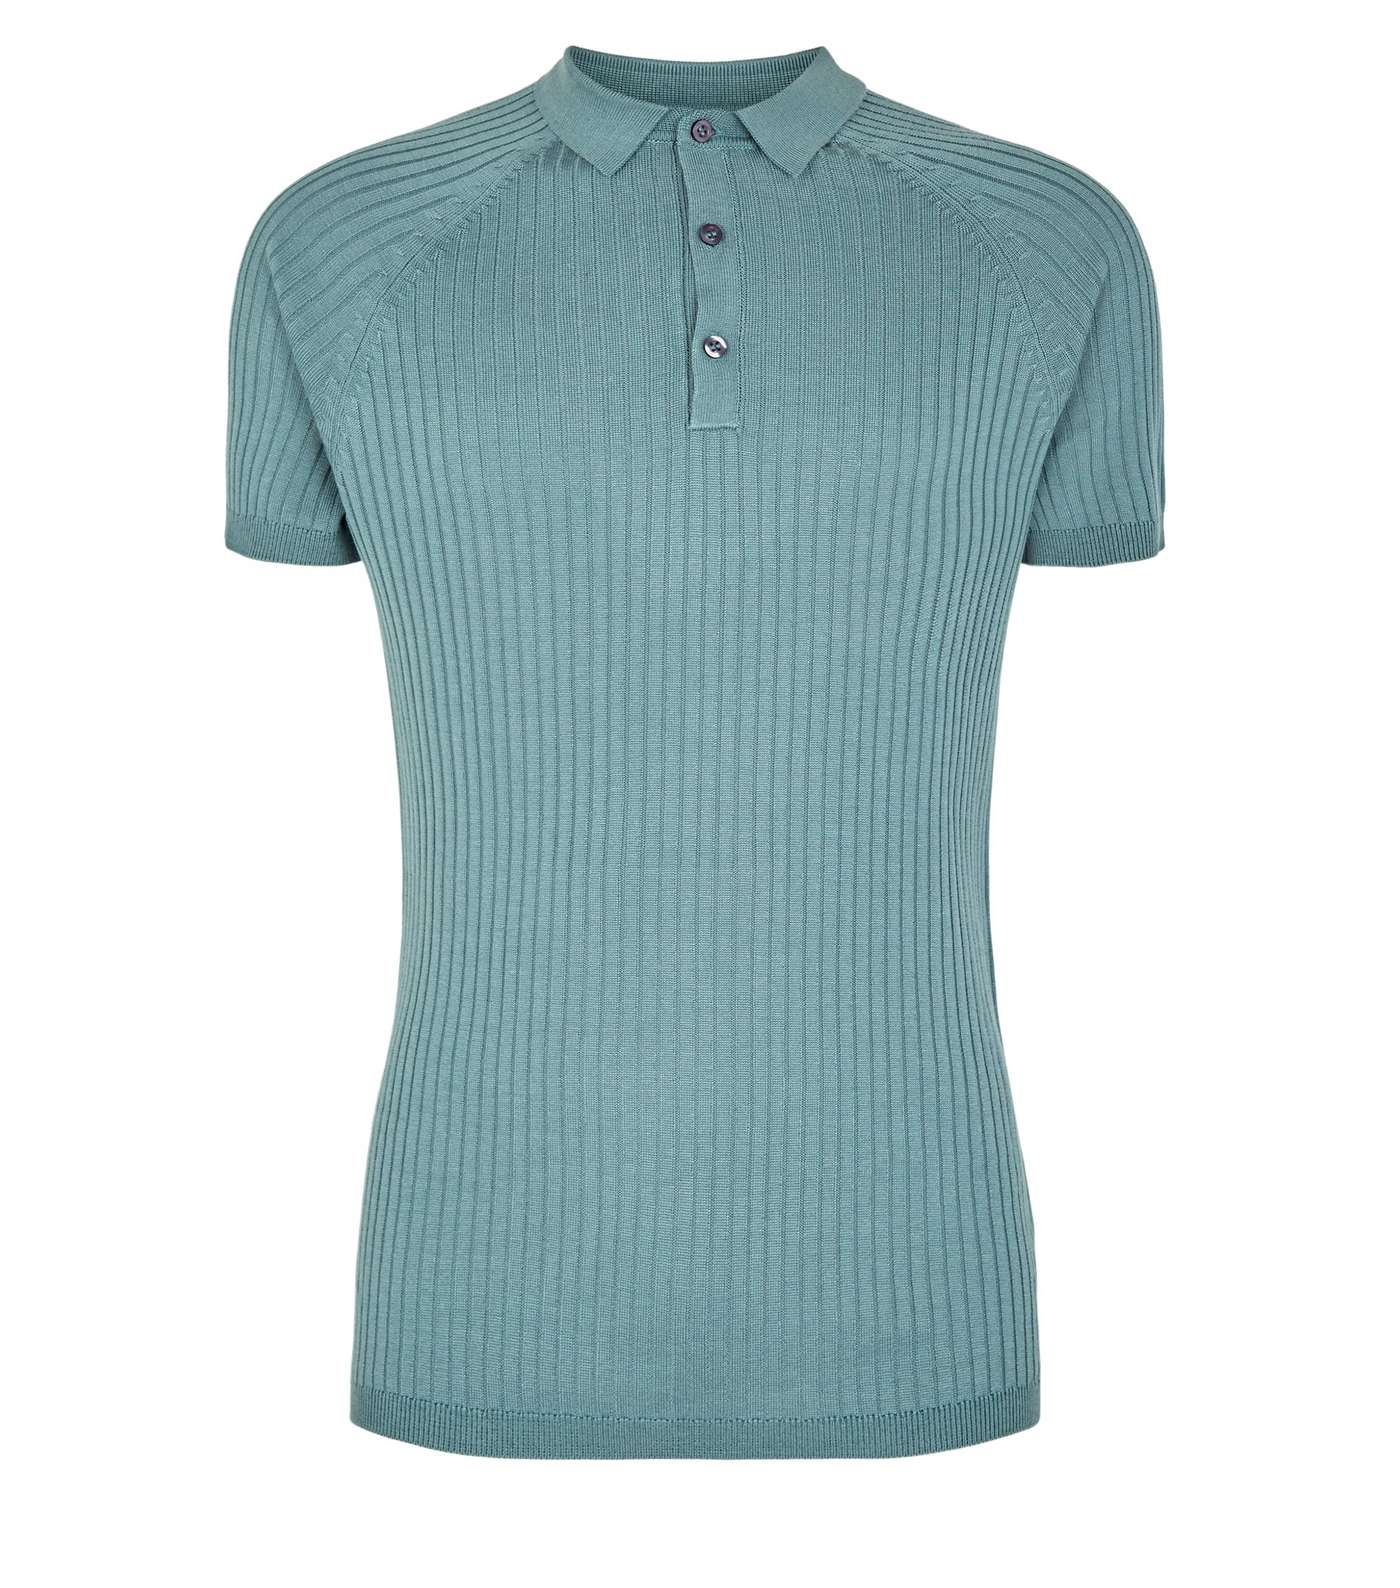 Teal Knit Muscle Fit Polo Shirt Image 4